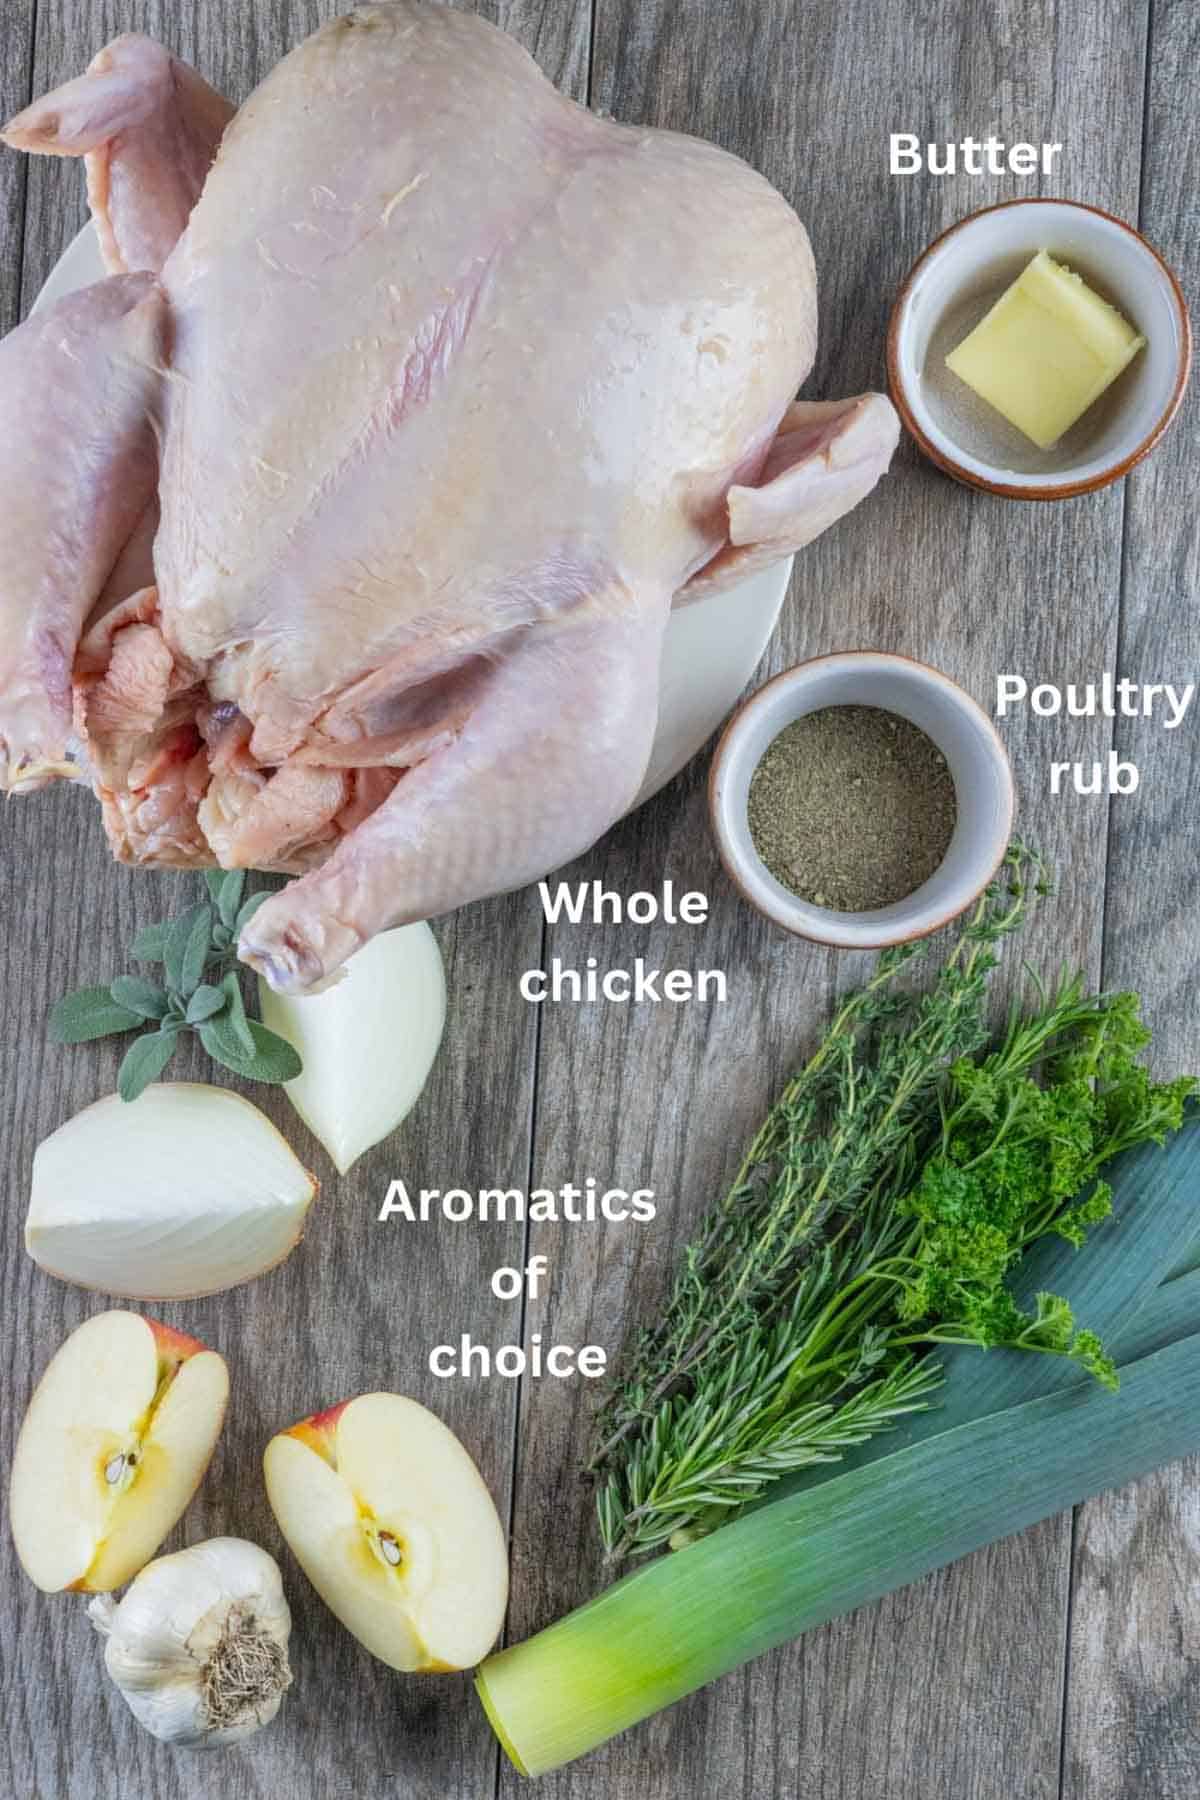 Ingredients for roasted chicken with white text labels.